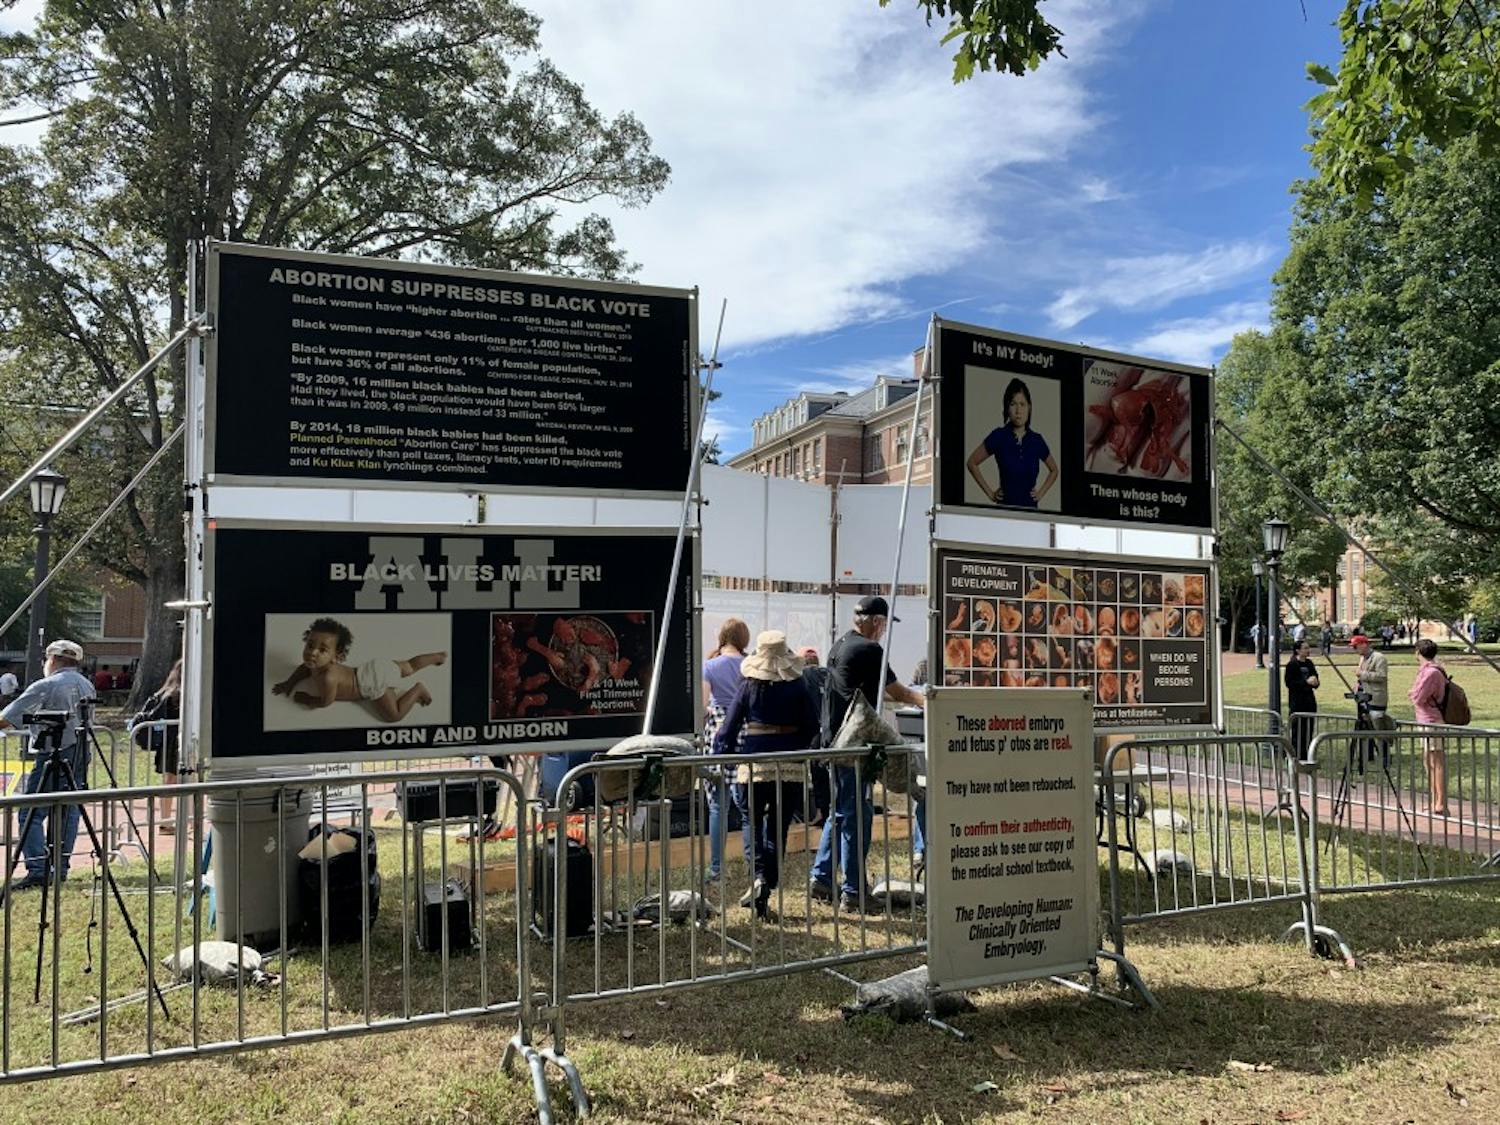 The Genocide Awareness Project, an anti-abortion movement, came to campus on Monday, October 21, 2019 for a demonstration. The project's large-scale installation compared abortion to historic acts of violence and genocide.